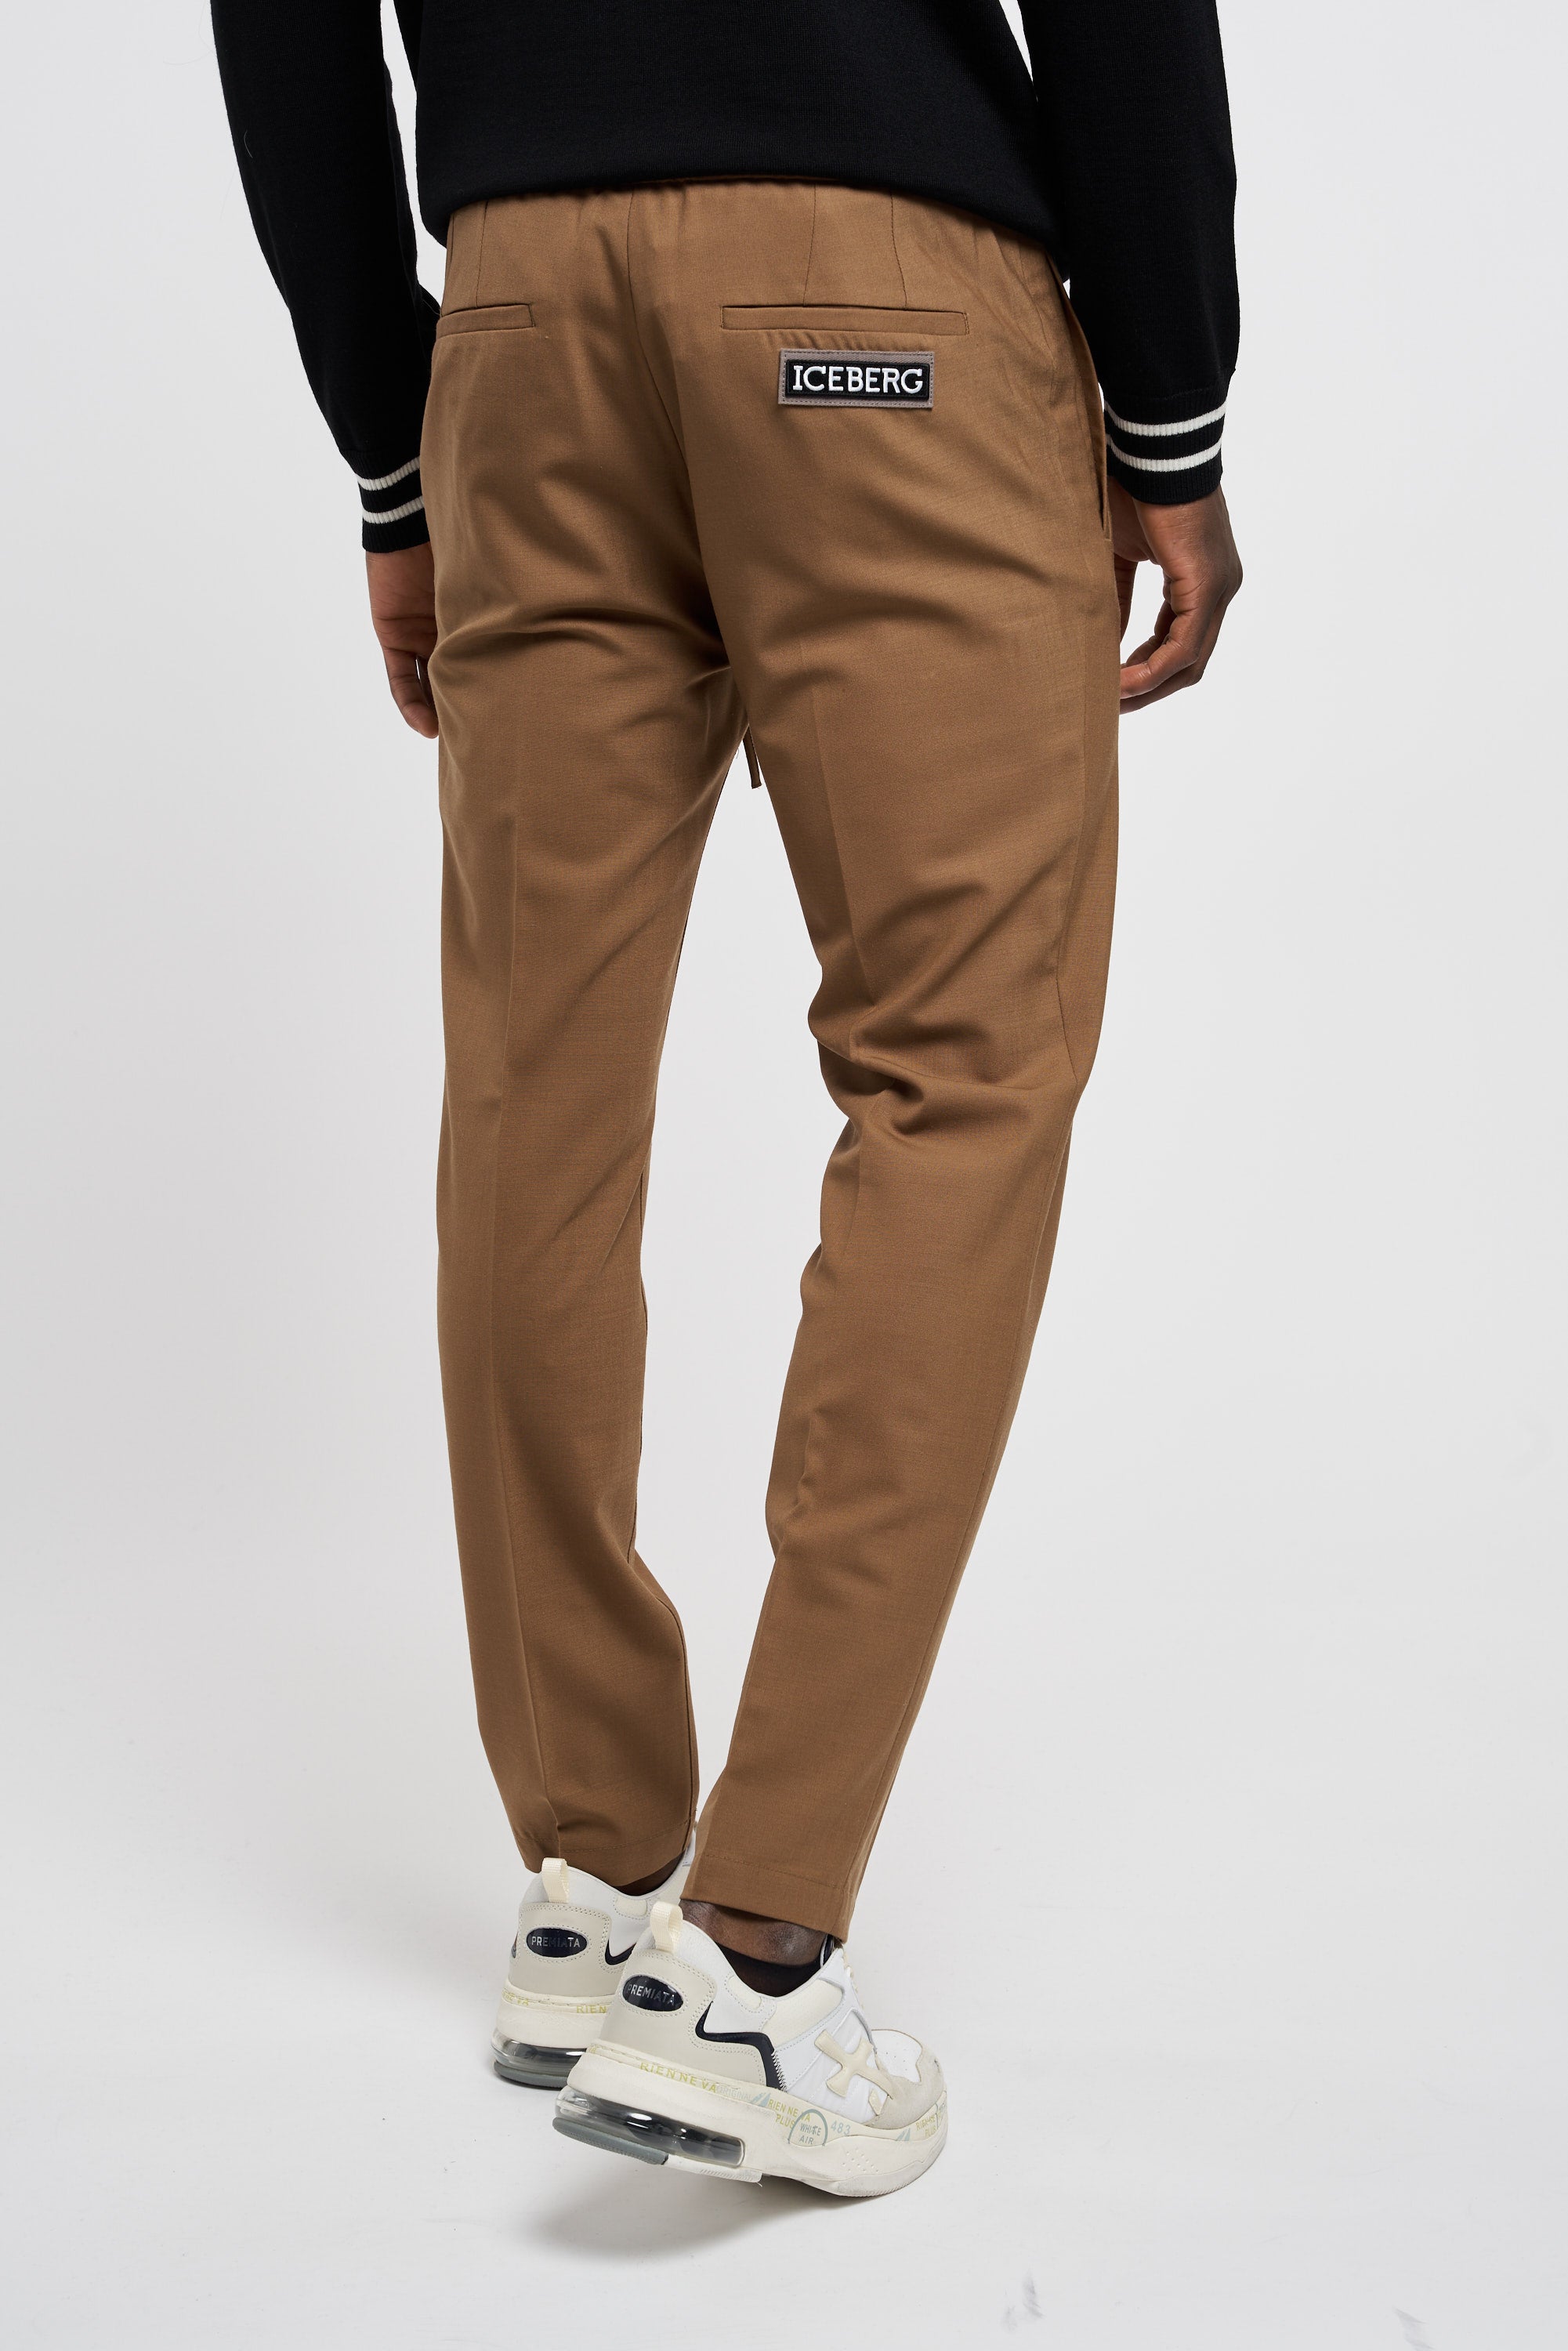 Iceberg Trousers with Logo Polyester/Wool Brown - 4